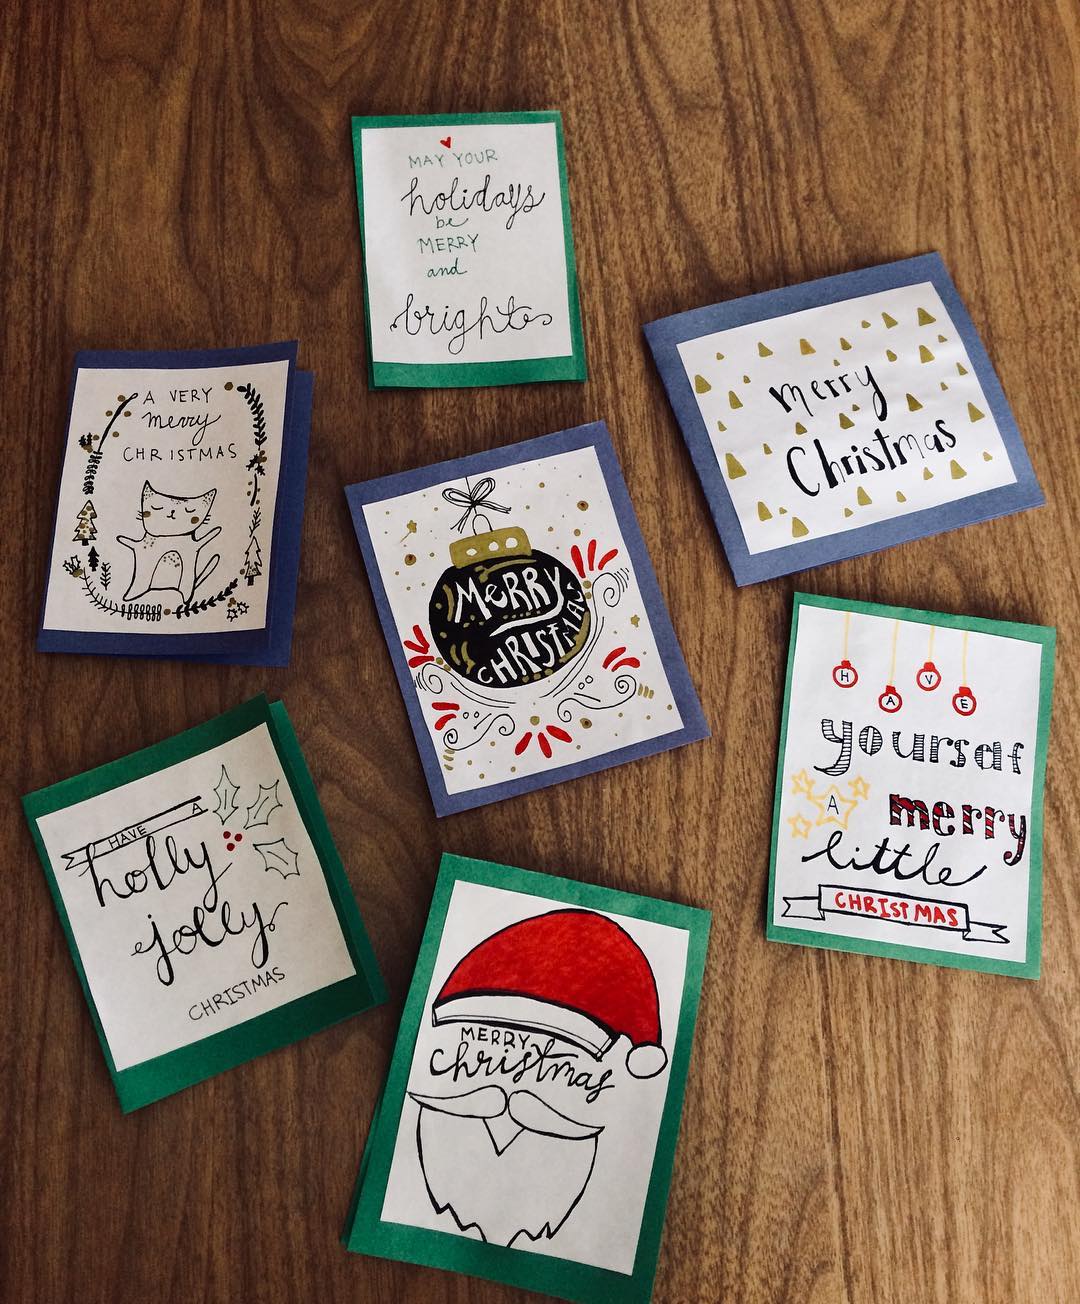 Spread Holiday Cheer with Gift Cards